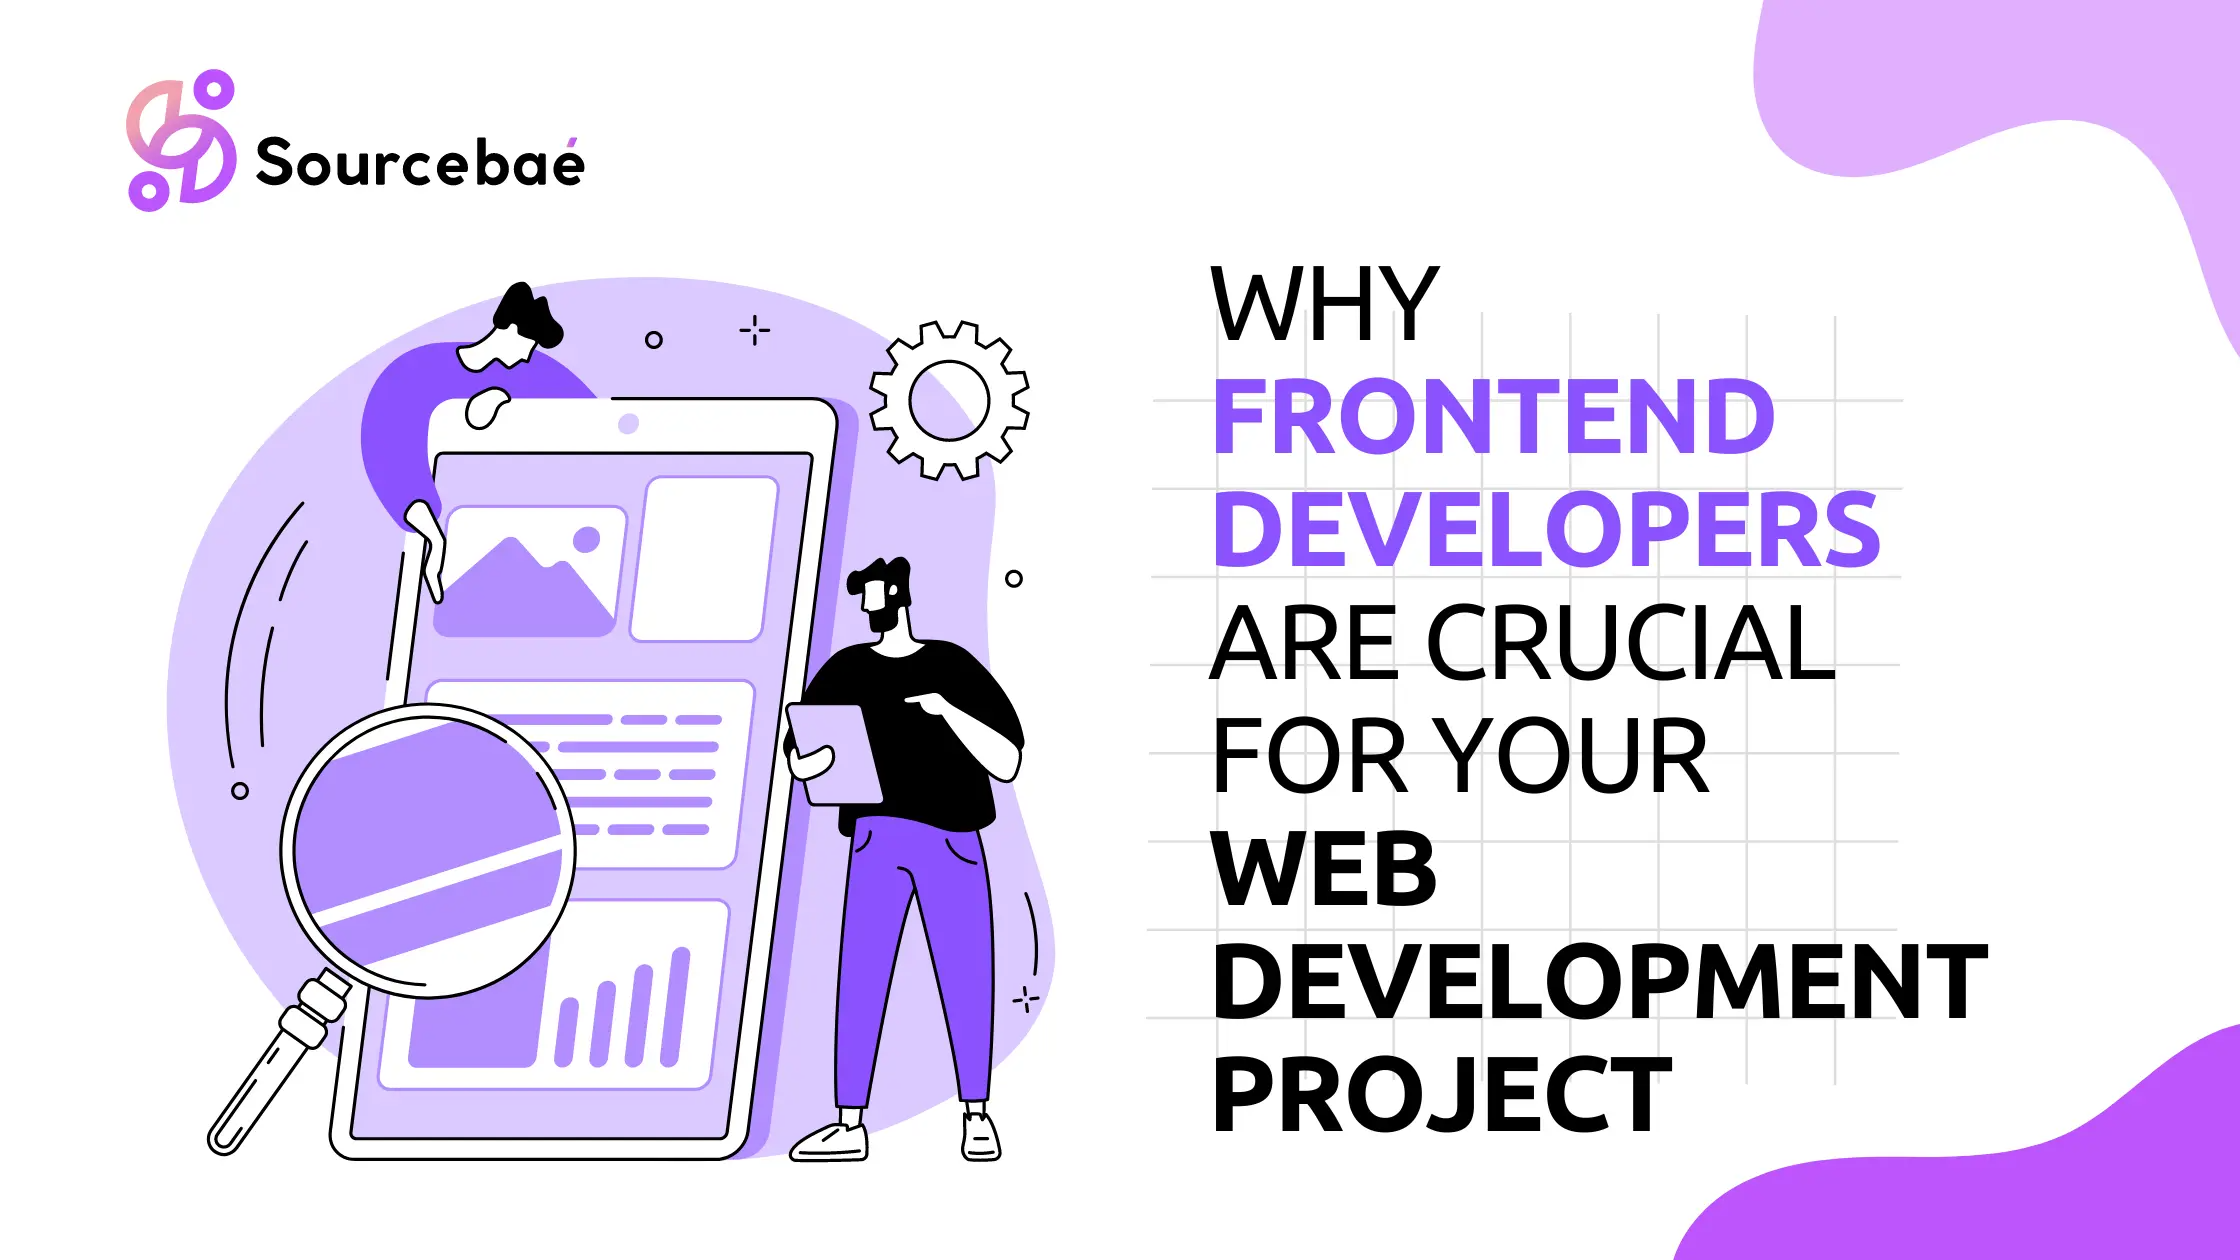 Why Frontend Developers are Crucial for Your Web Development Project